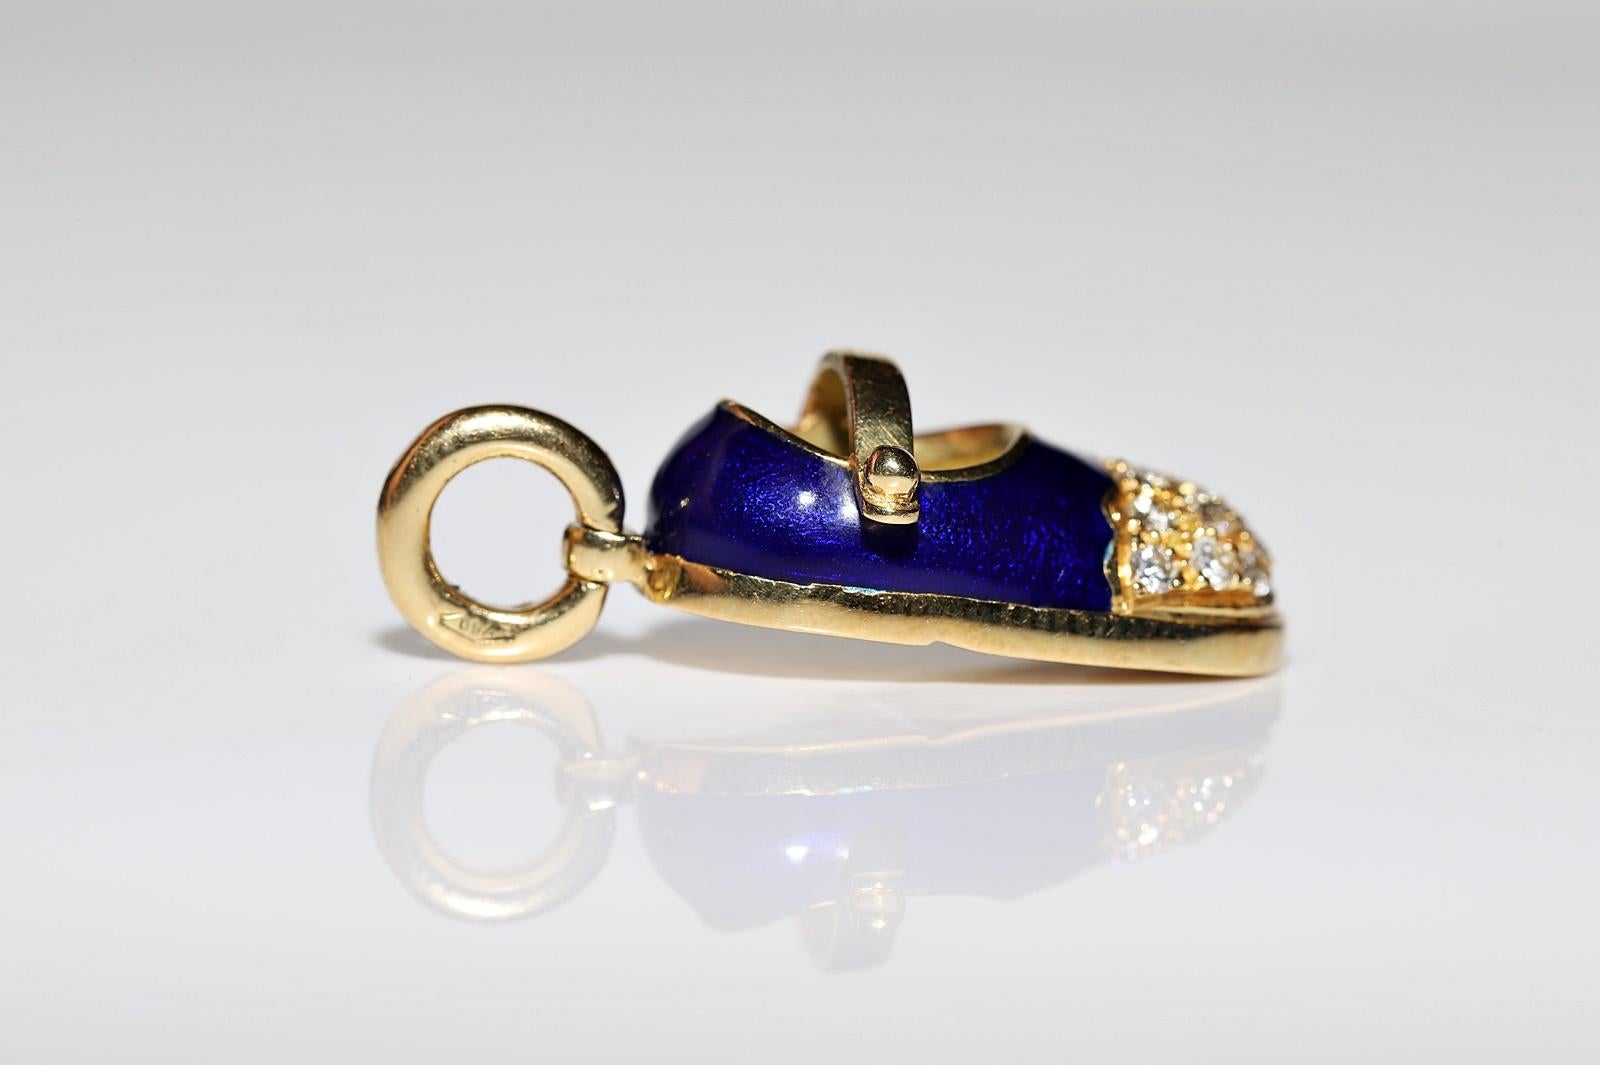 Vintage Circa 1980s 18k Gold Natural Diamond And Enamel Decorated Shoes Pendant In Good Condition For Sale In Fatih/İstanbul, 34